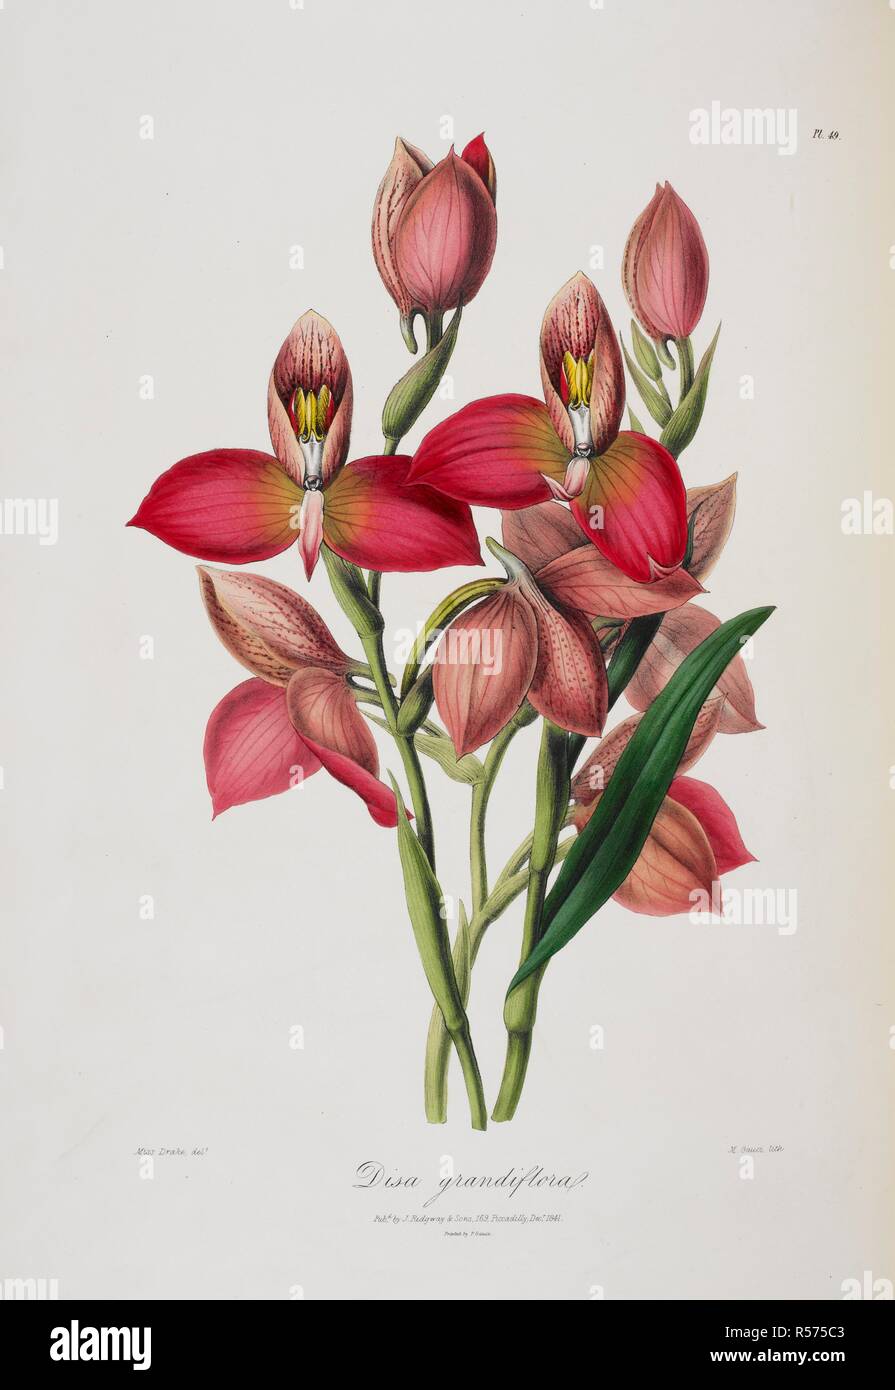 Disa grandiflora. Sertum Orchidaceum- a wreath of the most beautiful. London, 1838. Pink and red flowering plant. Image taken from Sertum Orchidaceum- a wreath of the most beautiful orchidaceous Flowers. Originally published/produced in London, 1838. Source: 1259.d.31, plate 49. Stock Photo